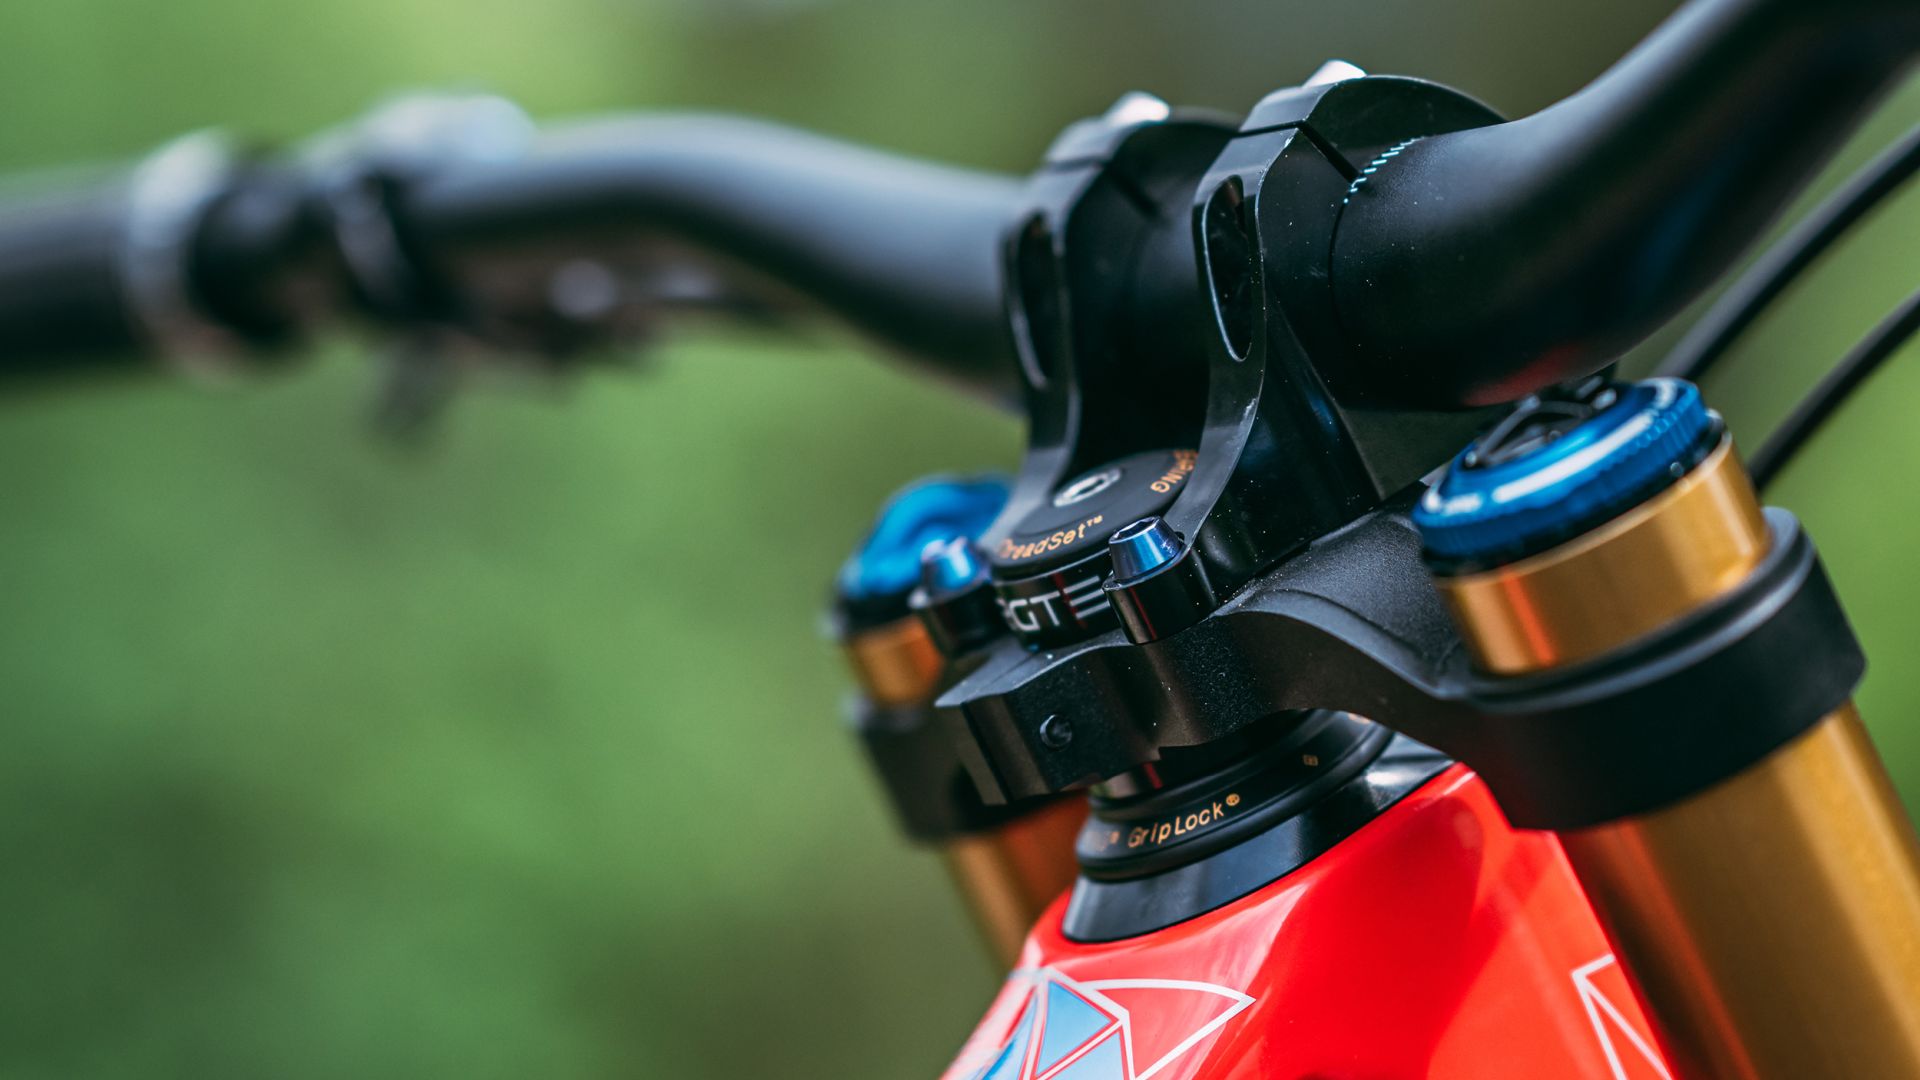 Chris King Releases DropSet 6, the Latest GripLock Headset in Their Lineup – Mountain Bike Press Release